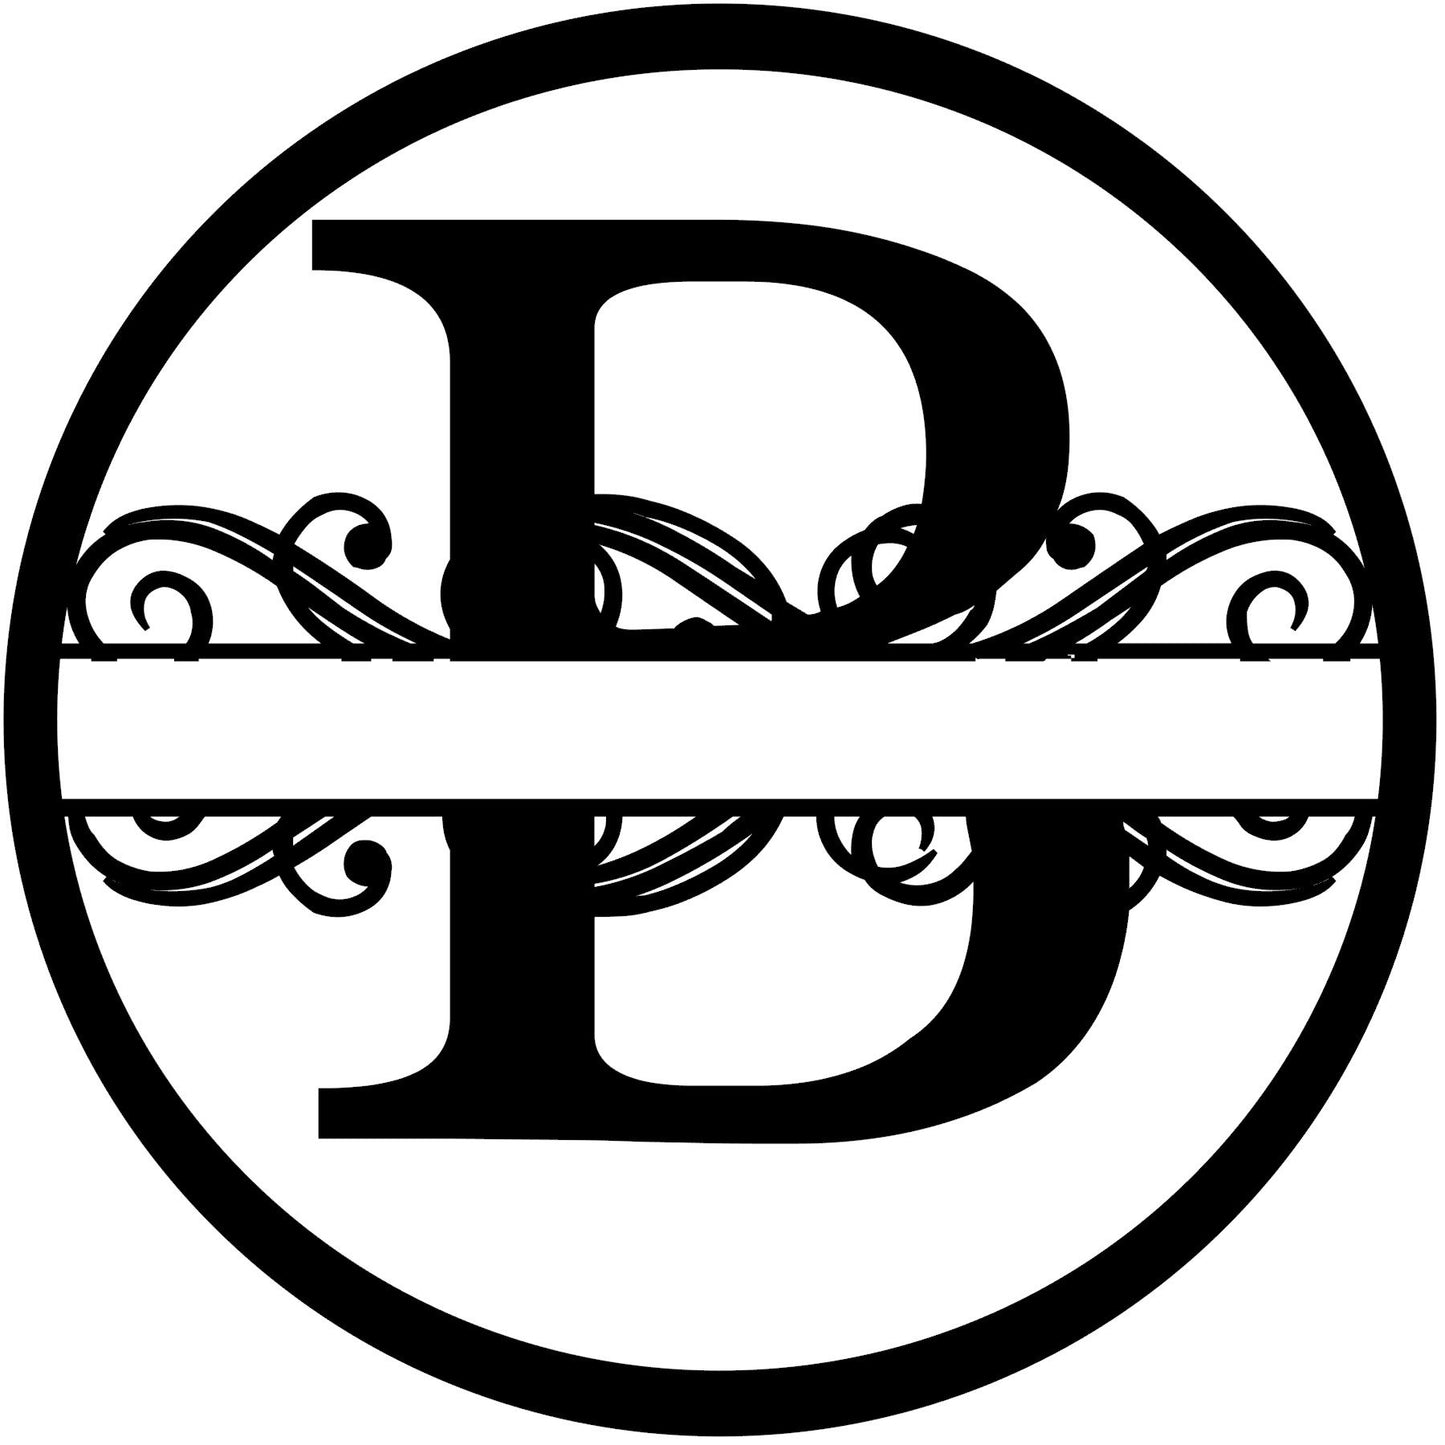 Ornate Monogram with Name in Center - Bucktooth Designs